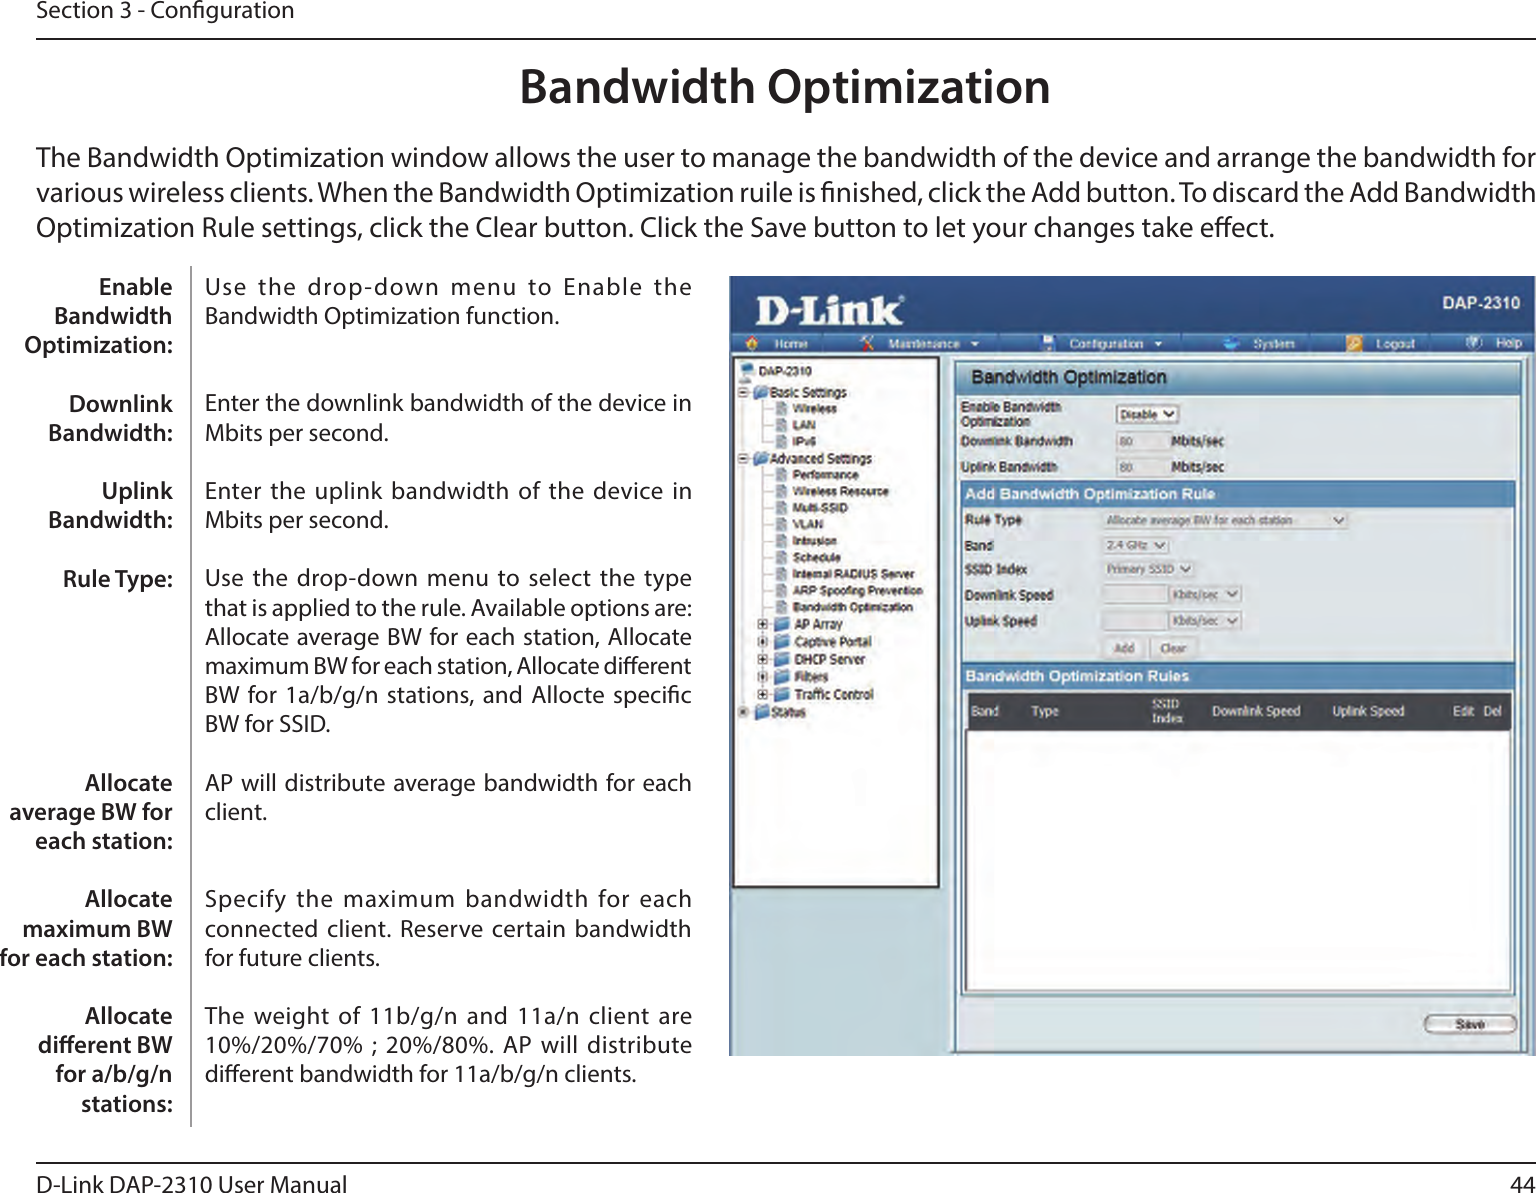 44D-Link DAP-2310 User ManualSection 3 - CongurationBandwidth OptimizationThe Bandwidth Optimization window allows the user to manage the bandwidth of the device and arrange the bandwidth for various wireless clients. When the Bandwidth Optimization ruile is nished, click the Add button. To discard the Add Bandwidth Optimization Rule settings, click the Clear button. Click the Save button to let your changes take eect.Use  the  drop-down  menu  to  Enable  the Bandwidth Optimization function. Enter the downlink bandwidth of the device in Mbits per second.Enter the uplink bandwidth of  the device in Mbits per second.Use the  drop-down menu to select the type that is applied to the rule. Available options are: Allocate average BW for each station, Allocate maximum BW for each station, Allocate dierent BW for 1a/b/g/n stations, and Allocte specic BW for SSID. AP will distribute average bandwidth for each client.Specify the maximum bandwidth for each connected client. Reserve certain bandwidth for future clients.The weight of 11b/g/n and 11a/n client are 10%/20%/70% ; 20%/80%. AP will distribute dierent bandwidth for 11a/b/g/n clients. Enable Bandwidth Optimization:Downlink Bandwidth:Uplink Bandwidth:Rule Type:Allocate average BW for each station:Allocate maximum BW for each station: Allocate dierent BW for a/b/g/n stations: